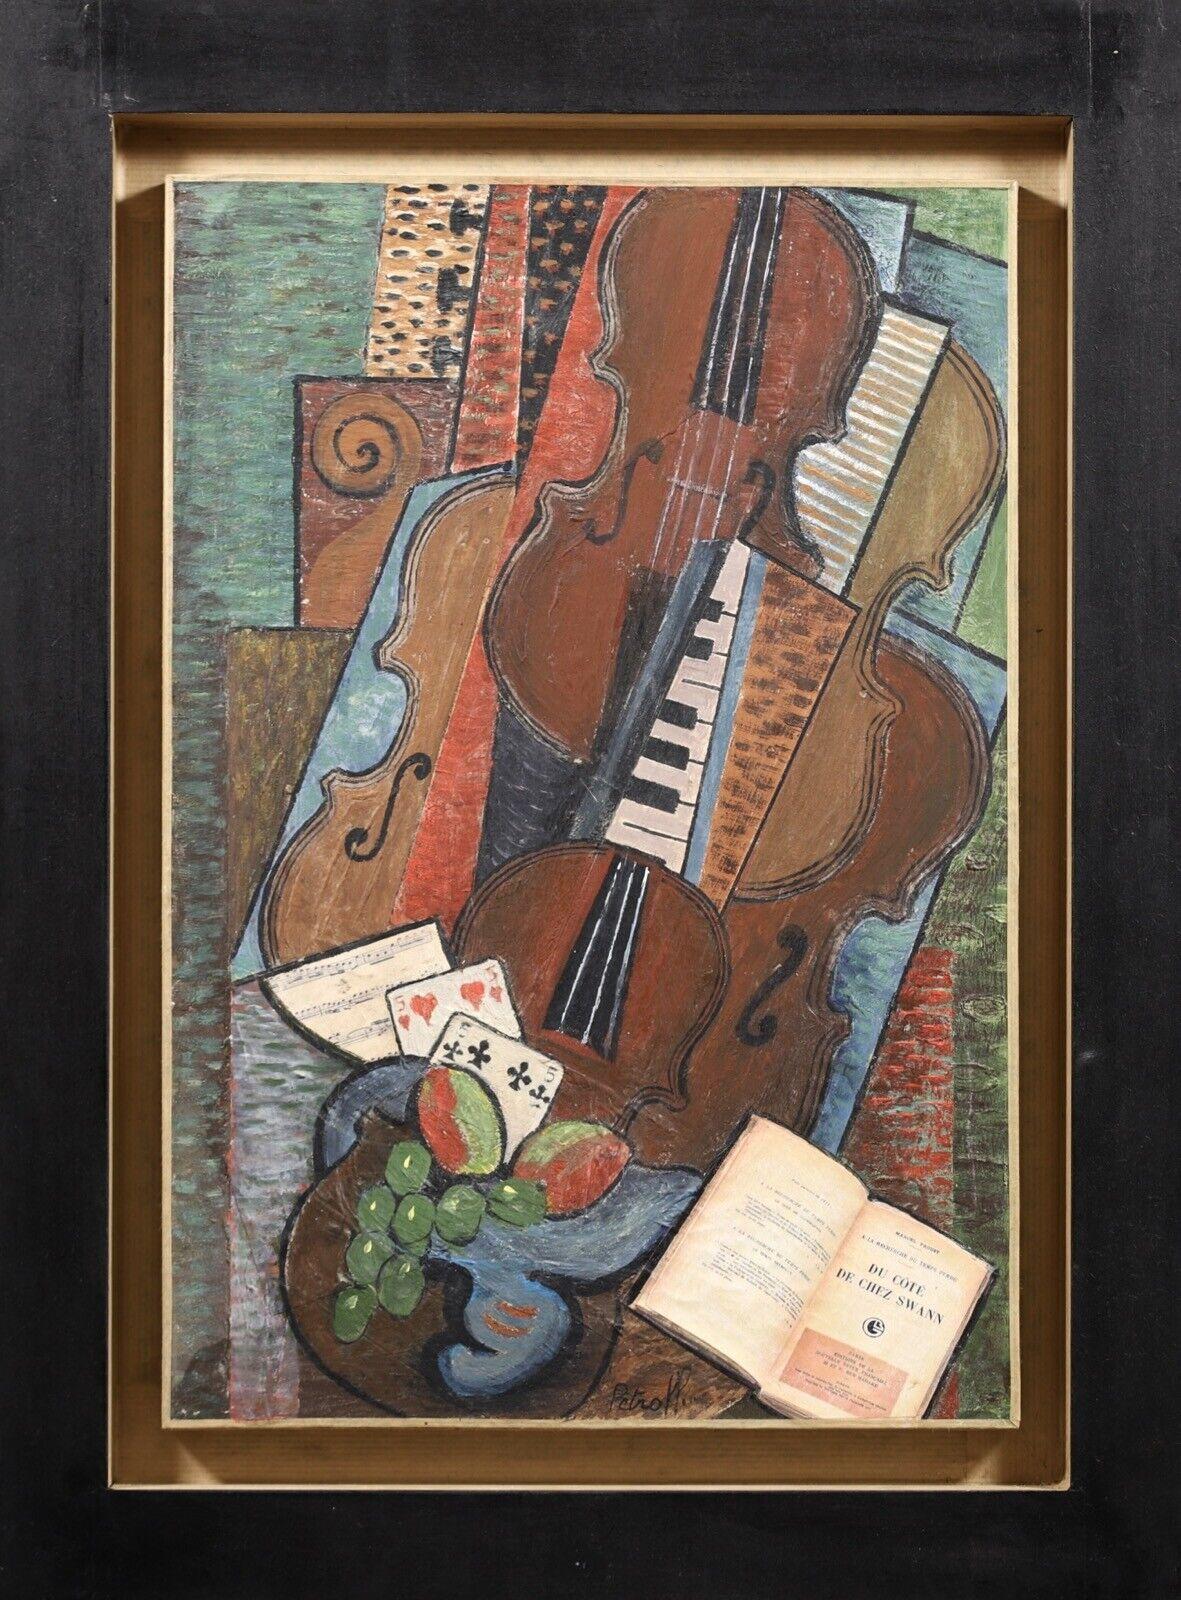 Signed Petroff (b.1954) Russian Cubist Musical Composition Violins Oil Painting on board, framed, depicting violins & cards.
Dimensions: (unframed) 19